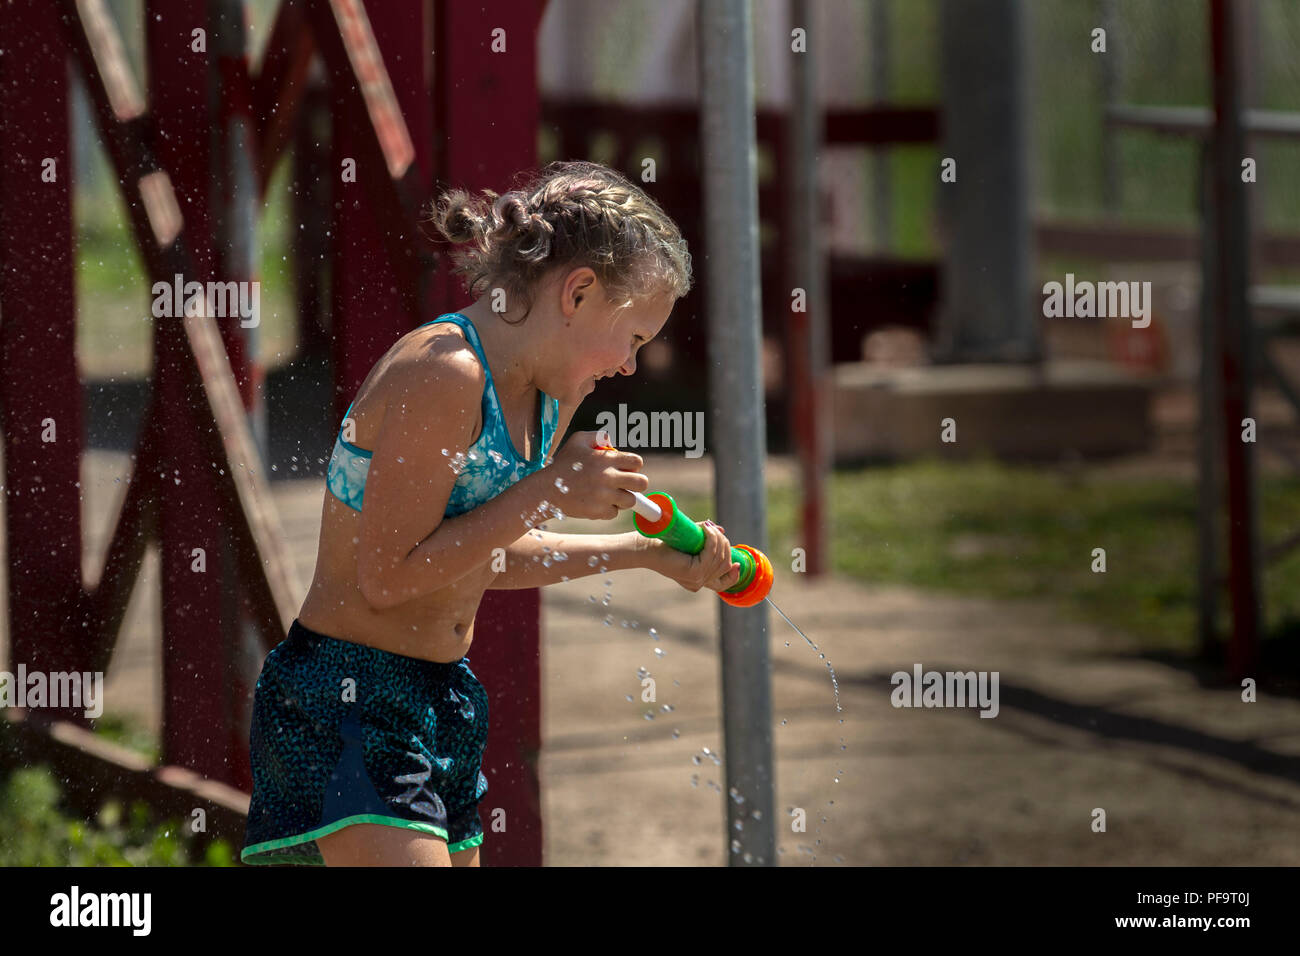 Summer time fun, kids and adults using pails, squirt guns and soakers, in a water fight. Smiling blonde with water gun, laughing. Model Released. Stock Photo